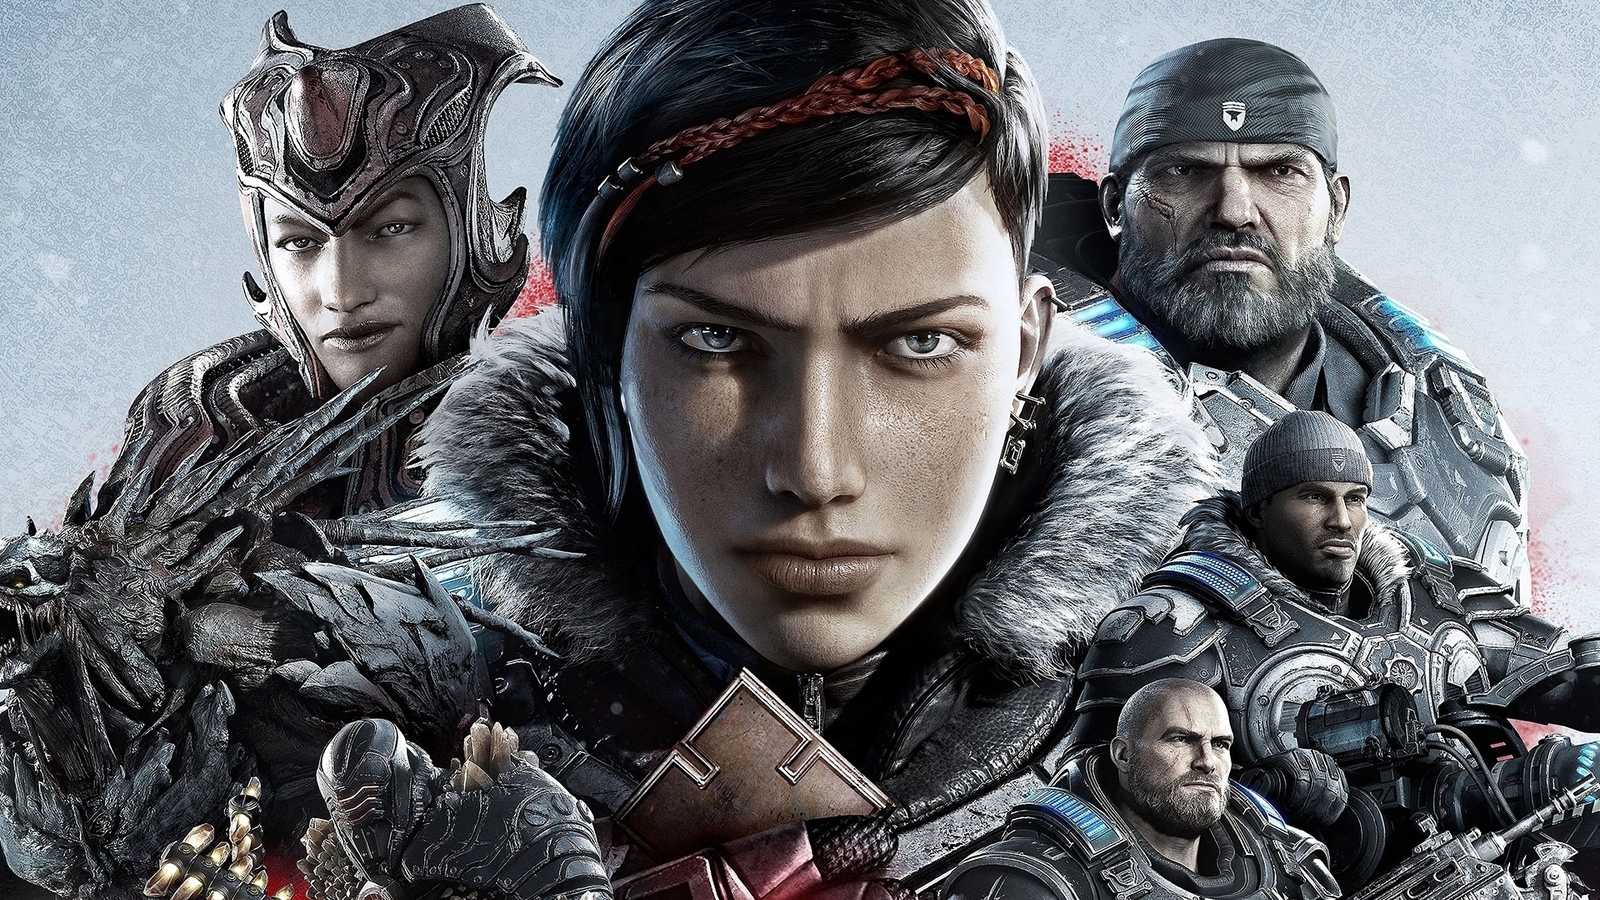 Gears 5: Game Of The Year Edition - Xbox Series X